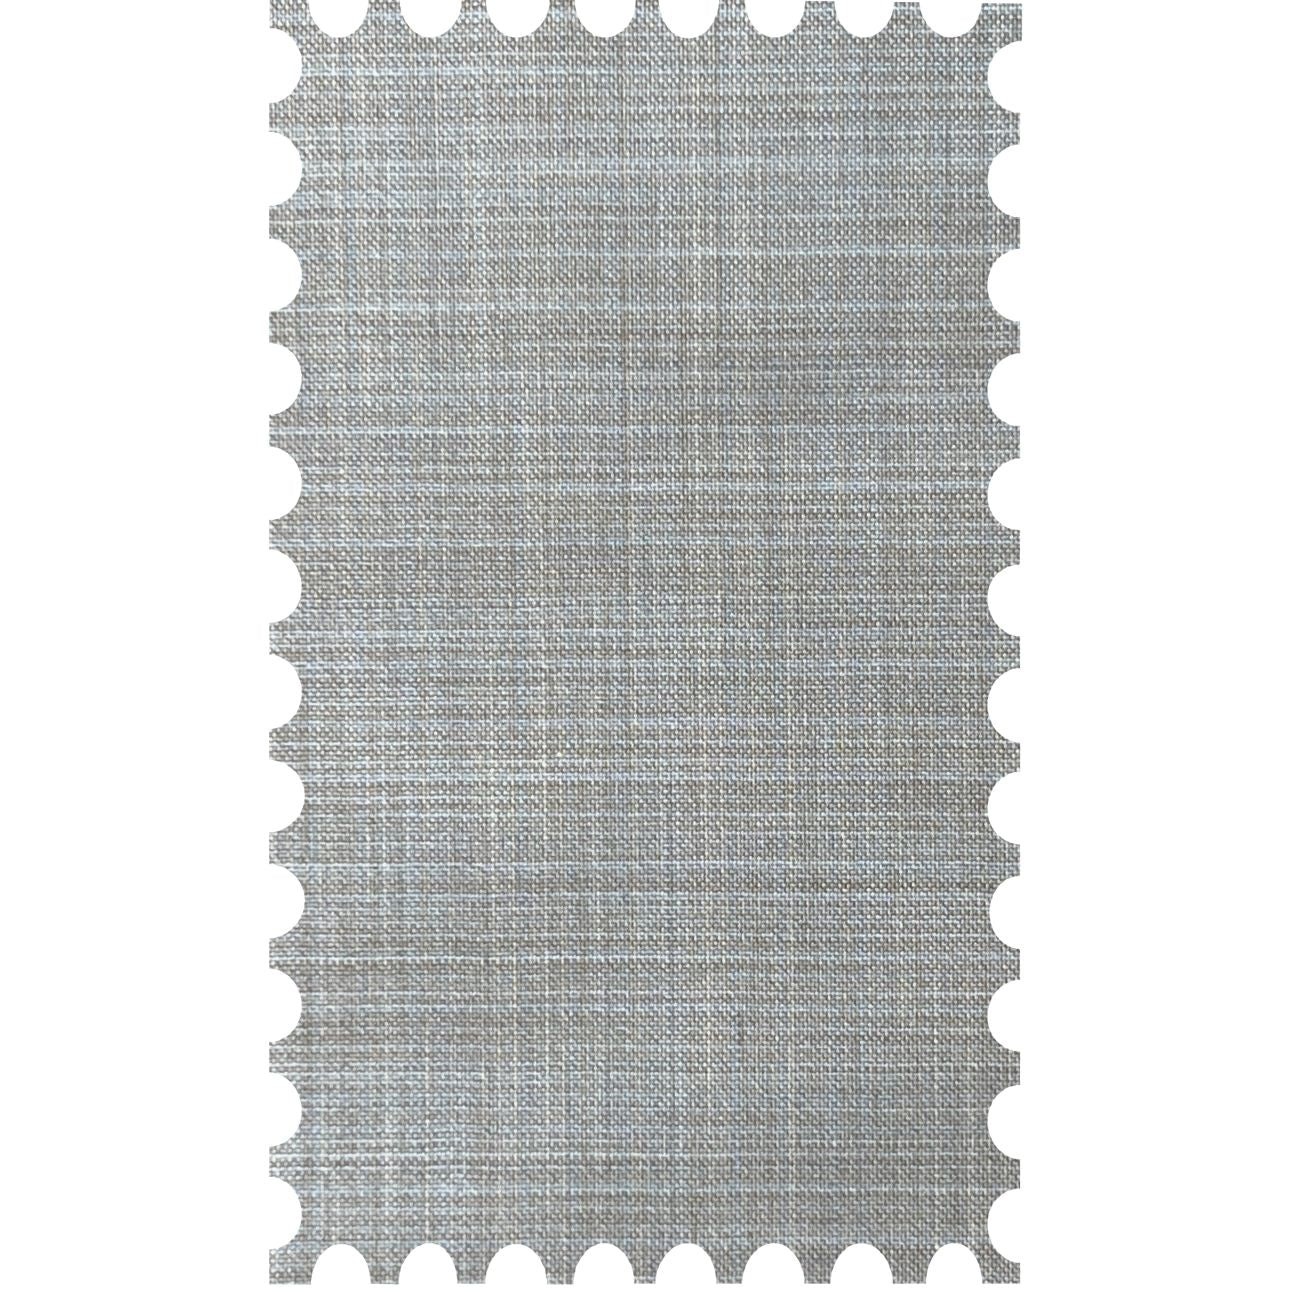 Todd Flat Front Super 120s Wool Fancy Trouser in Light Grey & Tan Crosshatch (Full Fit) - LIMITED EDITION by Zanella